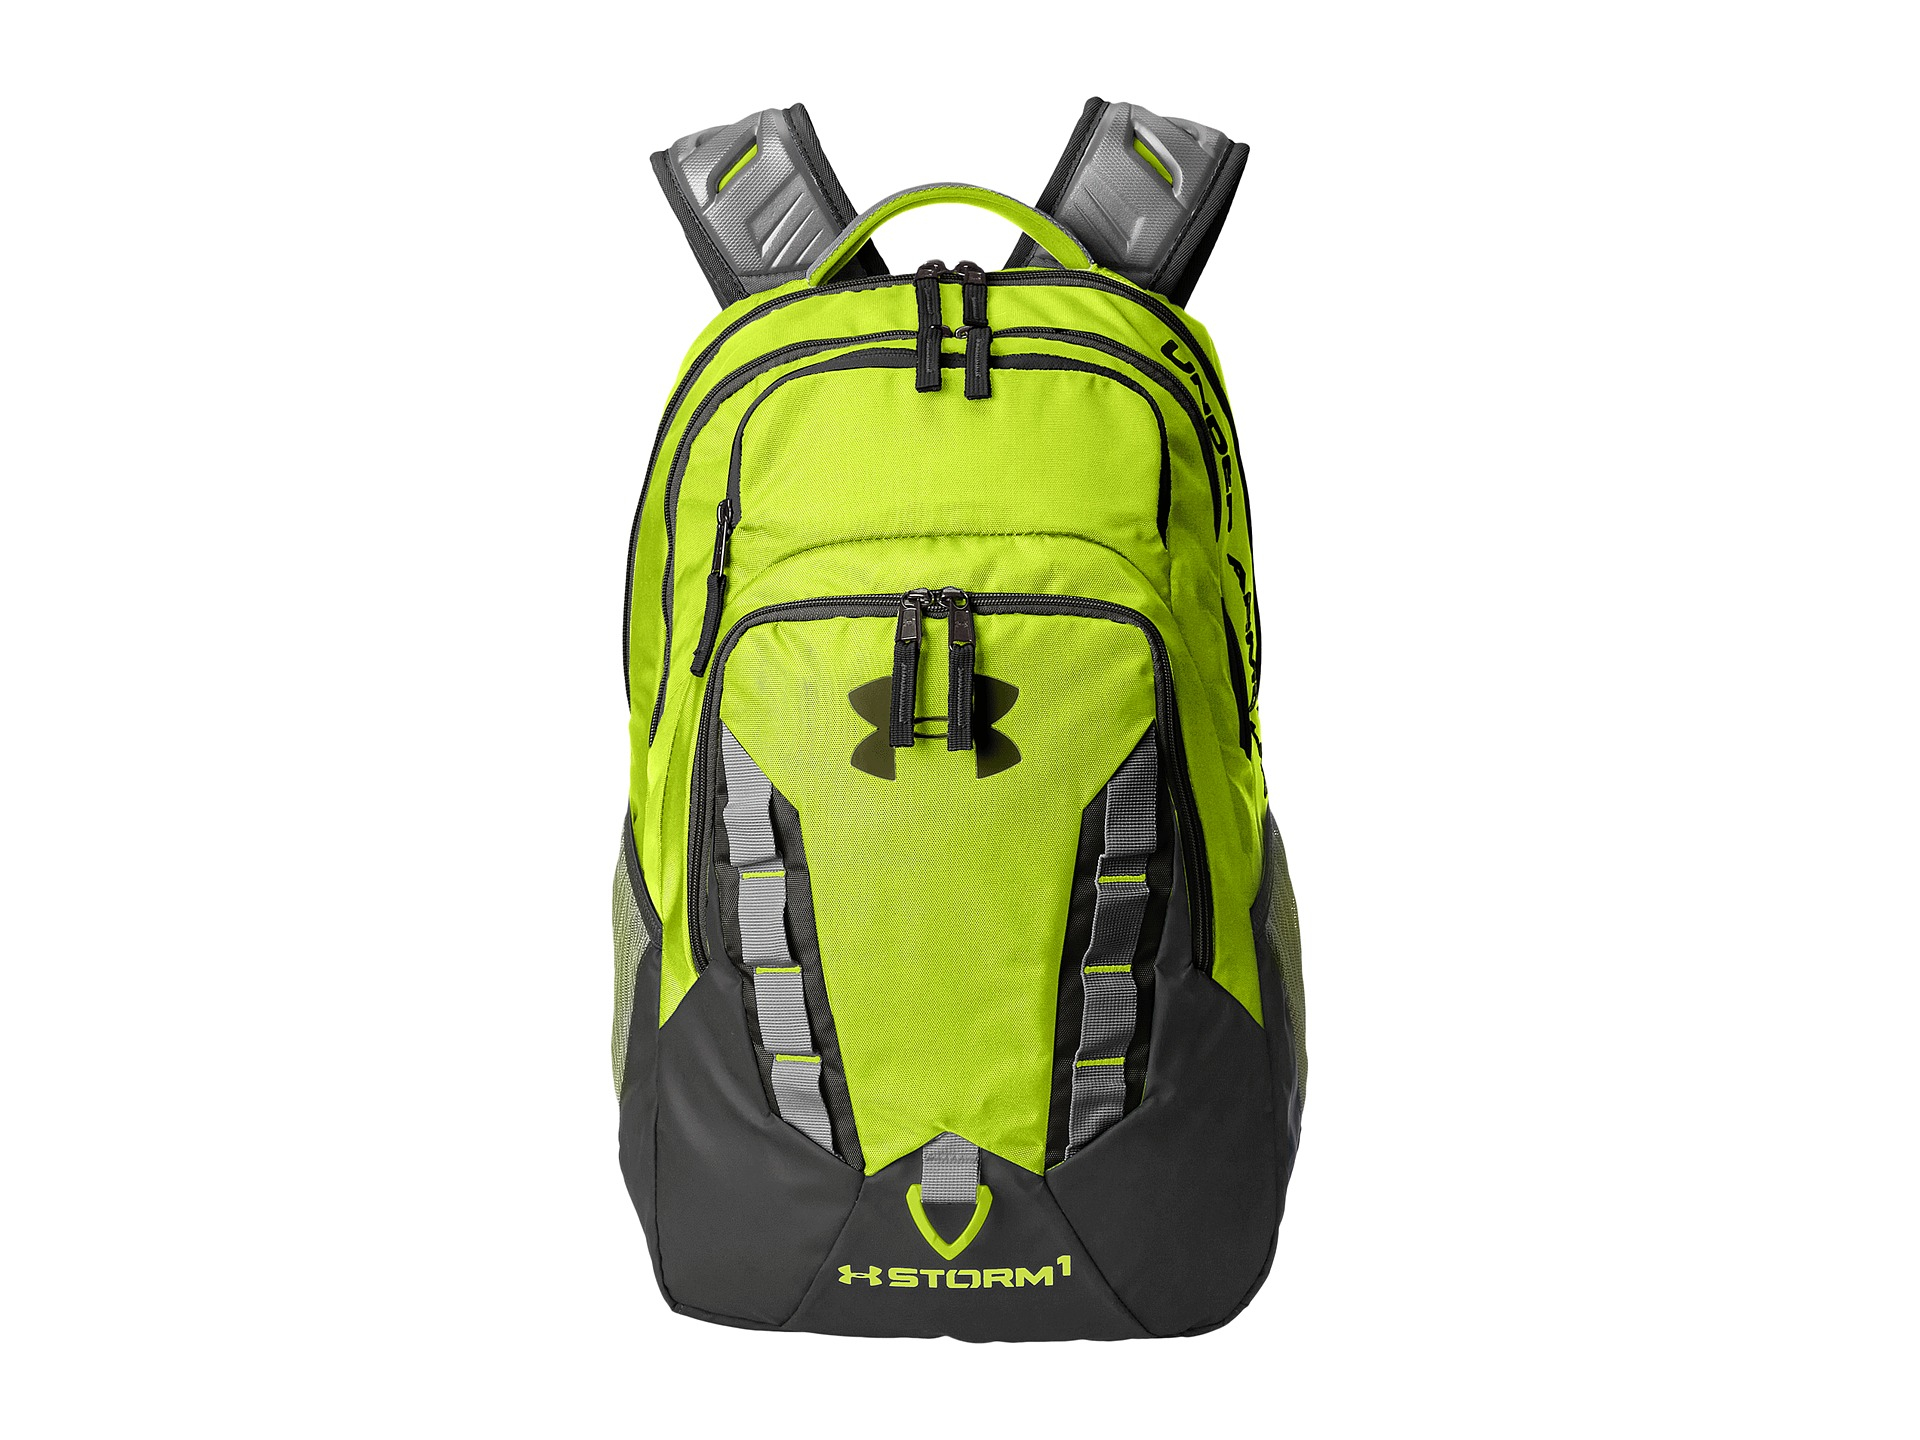 under armour backpack yellow